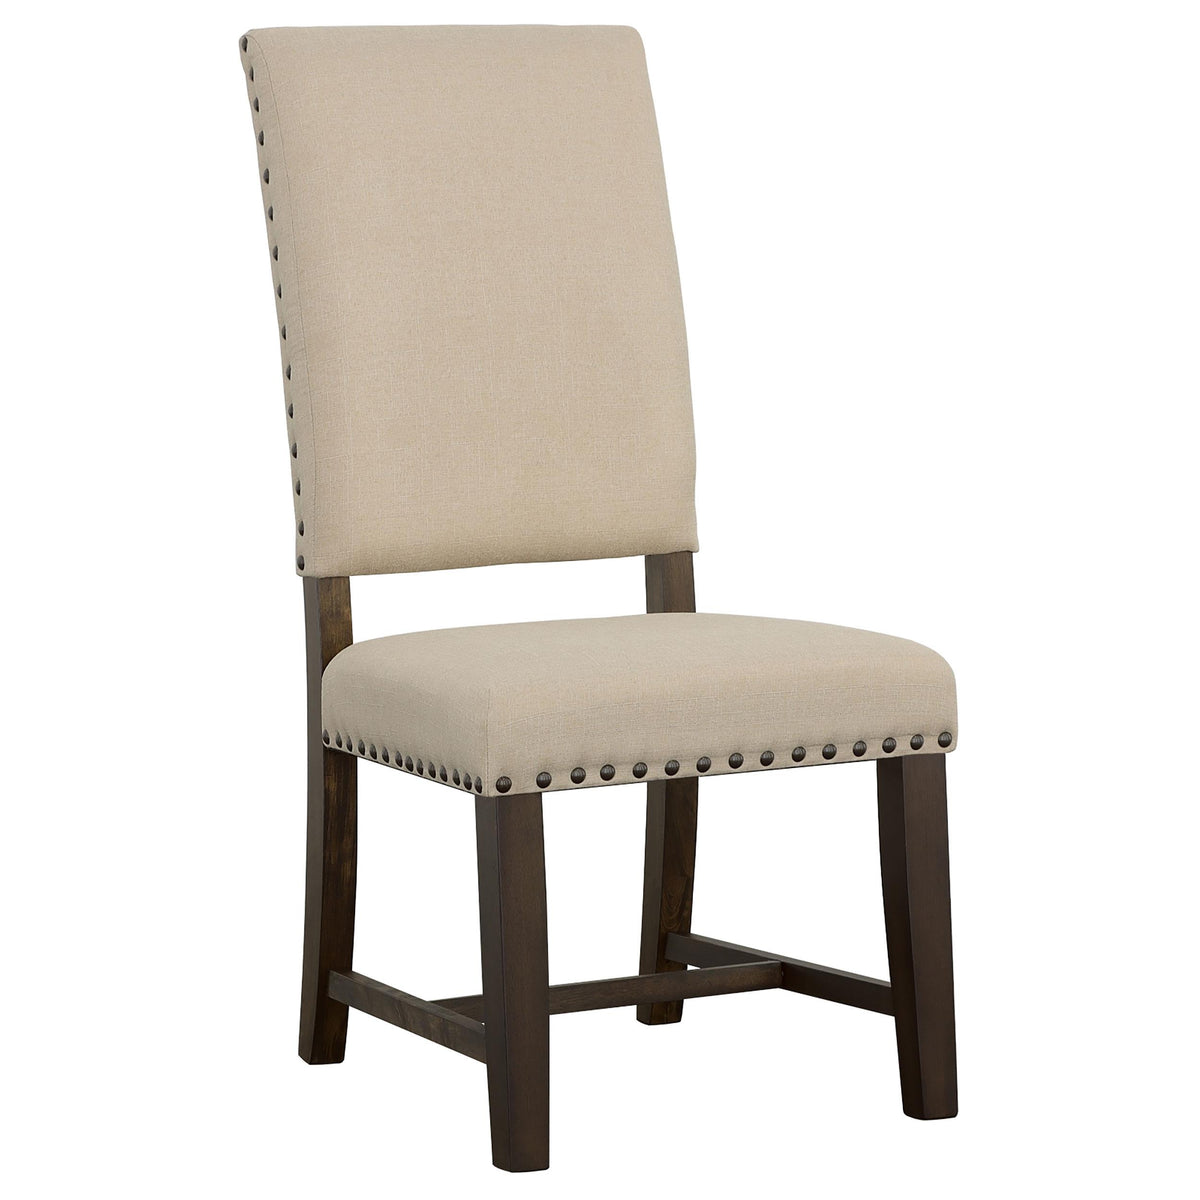 Twain Upholstered Side Chairs Beige (Set of 2)  Half Price Furniture